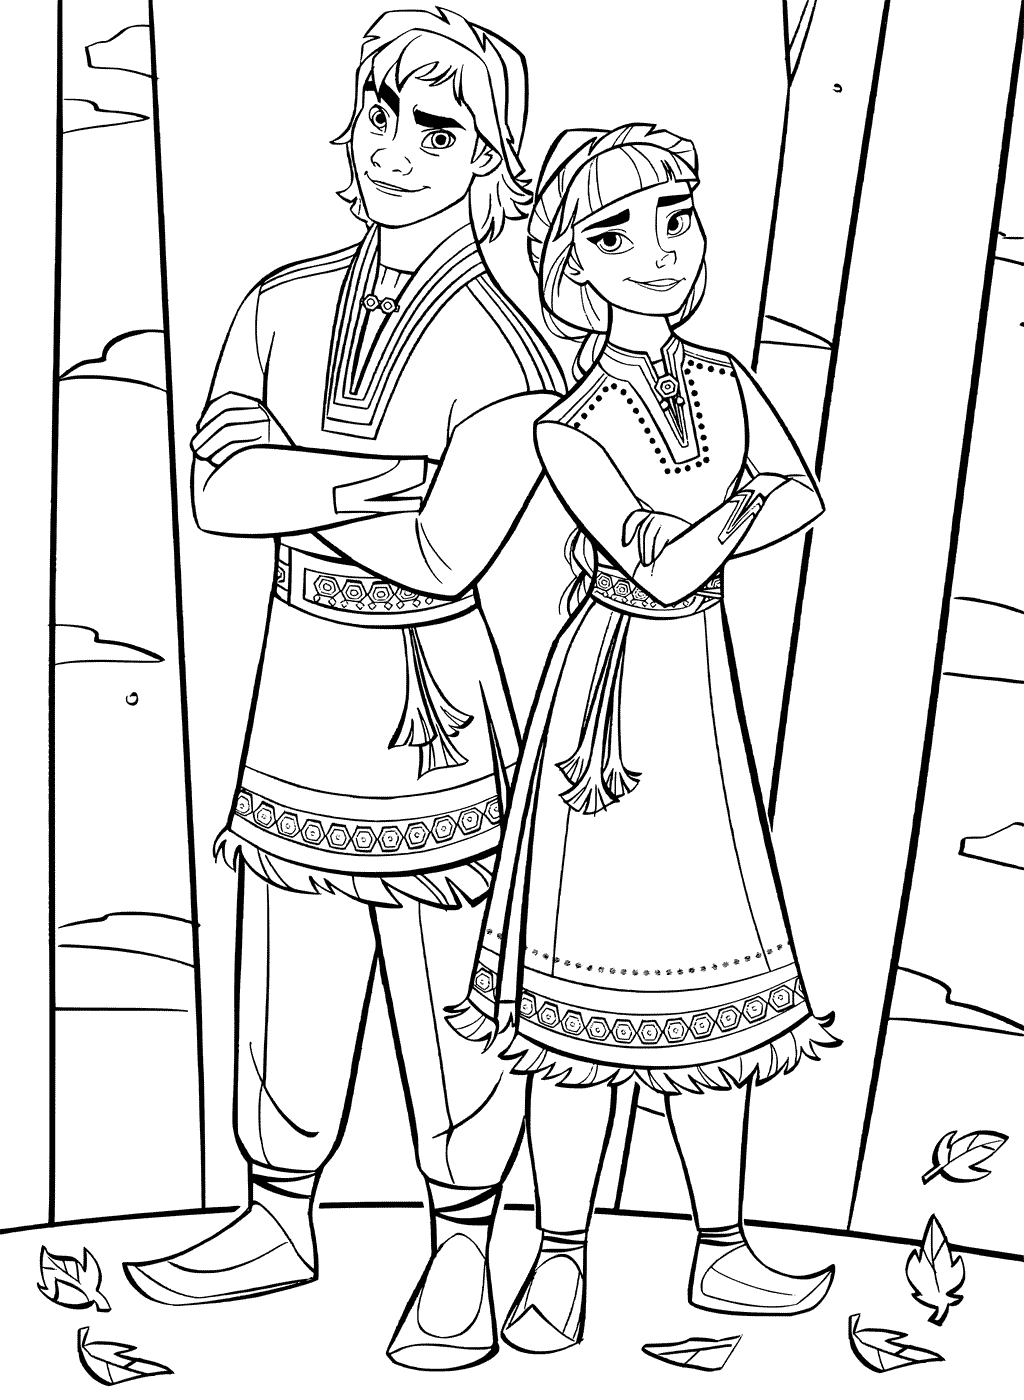 Frozen 2 New Characters Honeymaren And Ryder Coloring Page